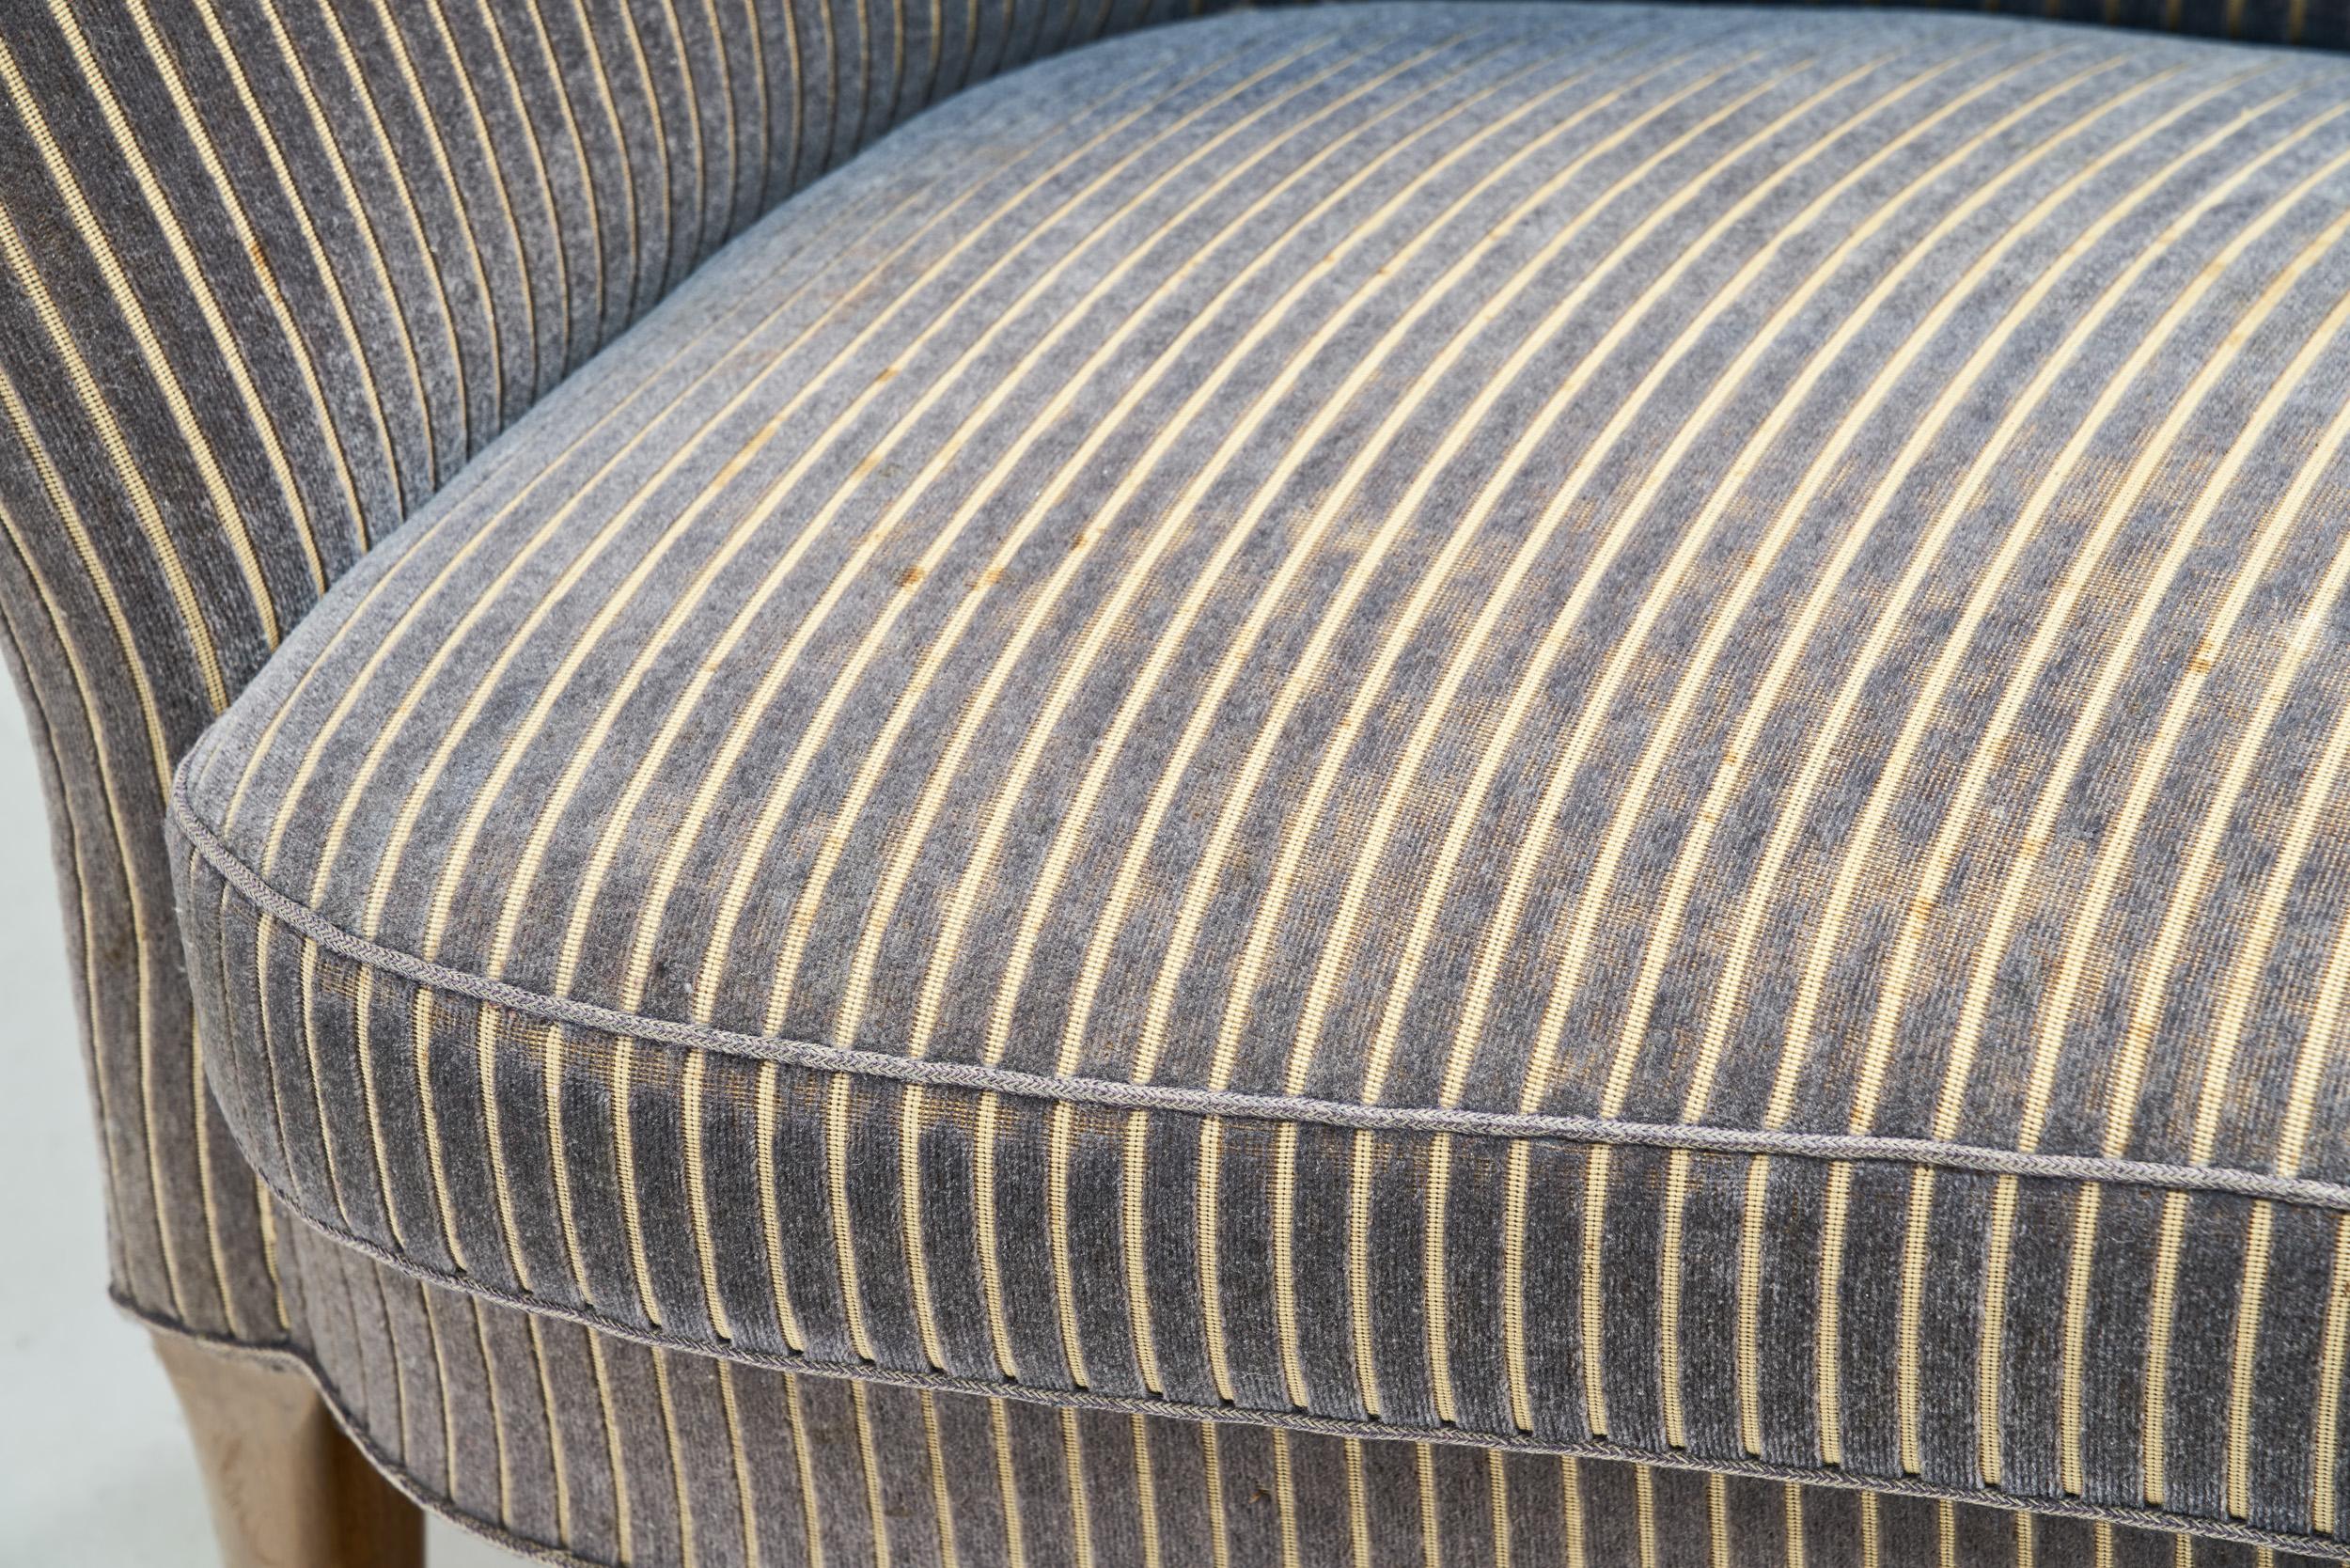 Danish Cabinetmaker Two-Seater Sofa with Striped Upholstery, Denmark 1940s For Sale 3